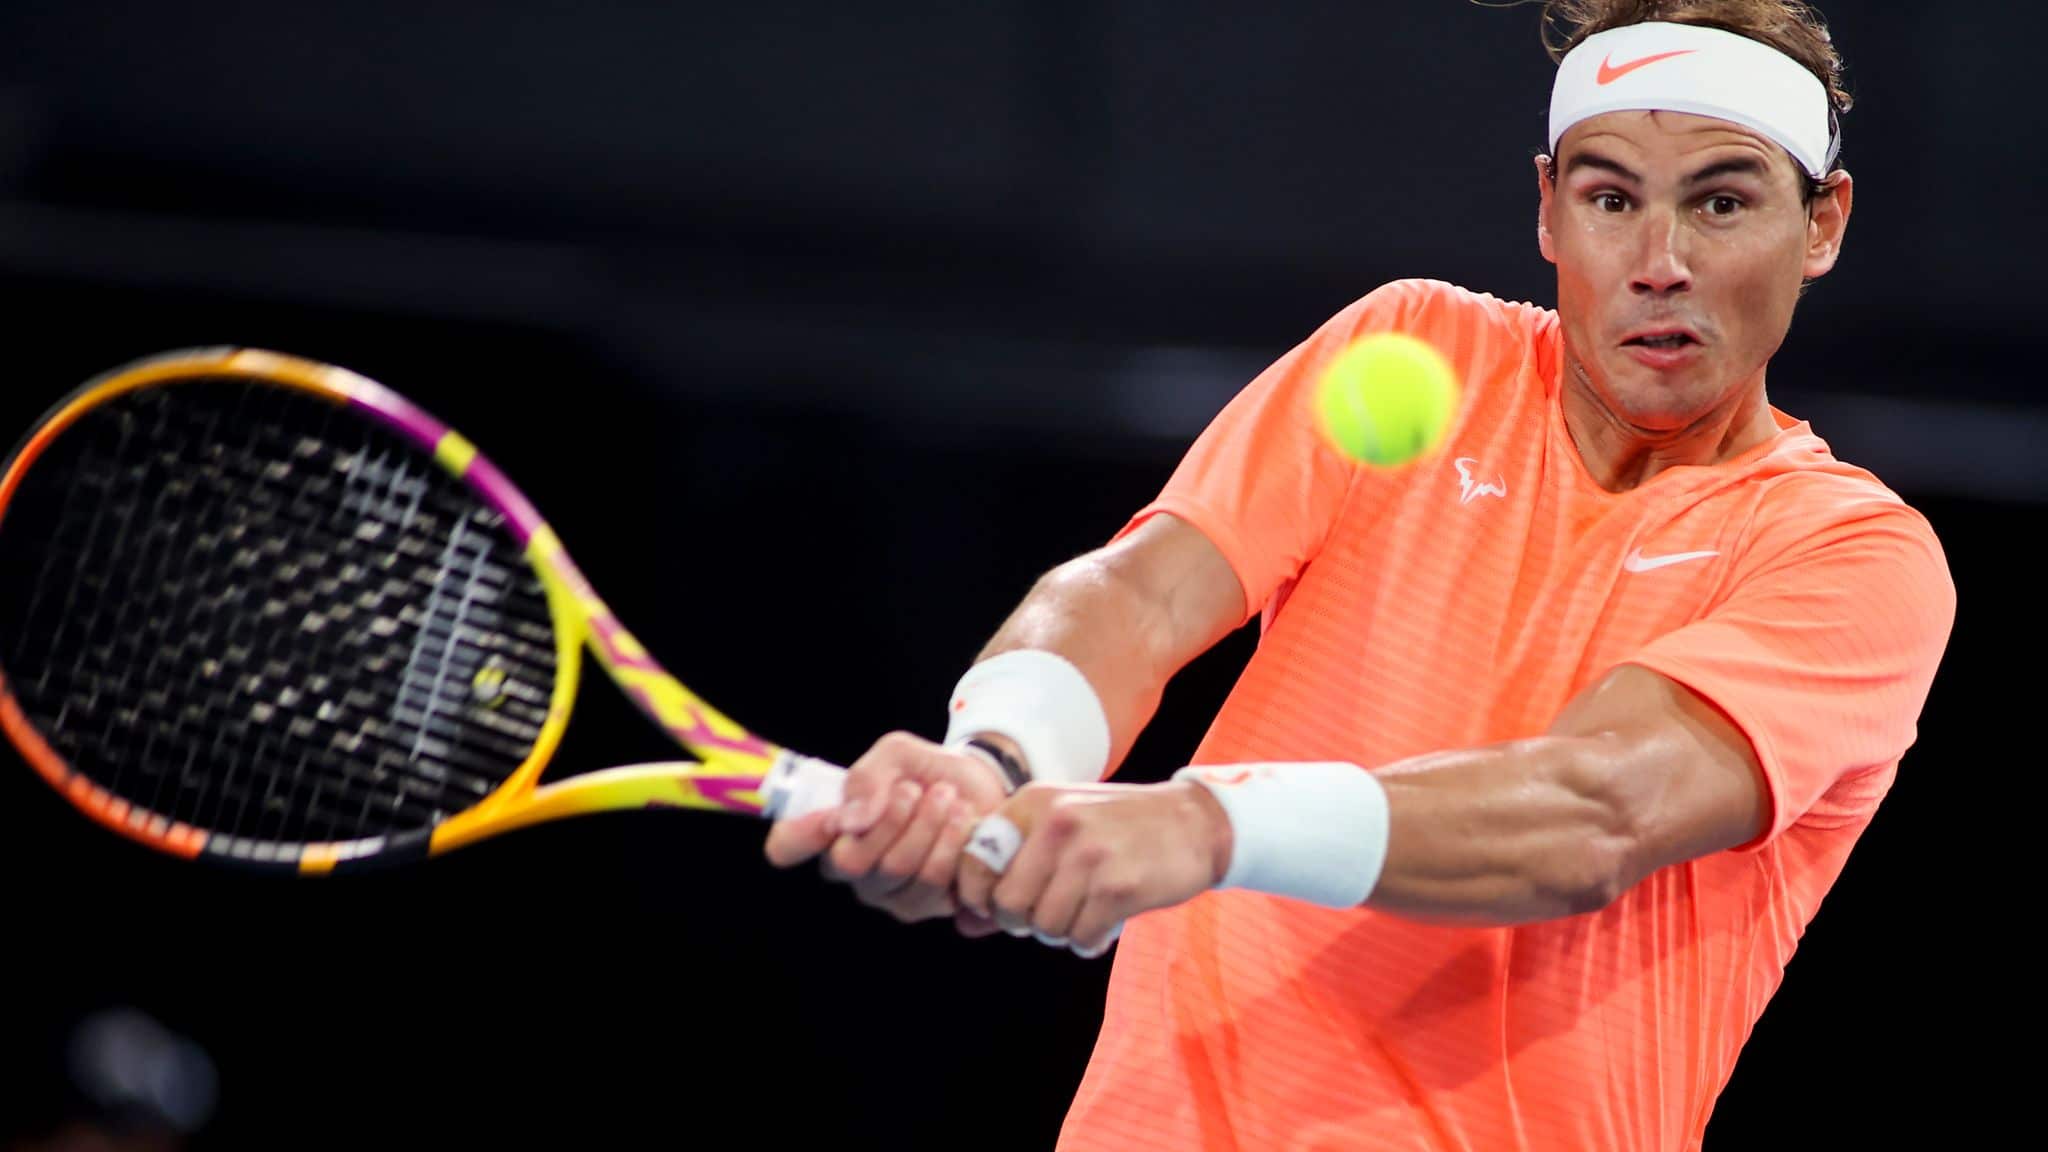 Nadal Pulls Out Of Wimbledon, Tokyo Olympics